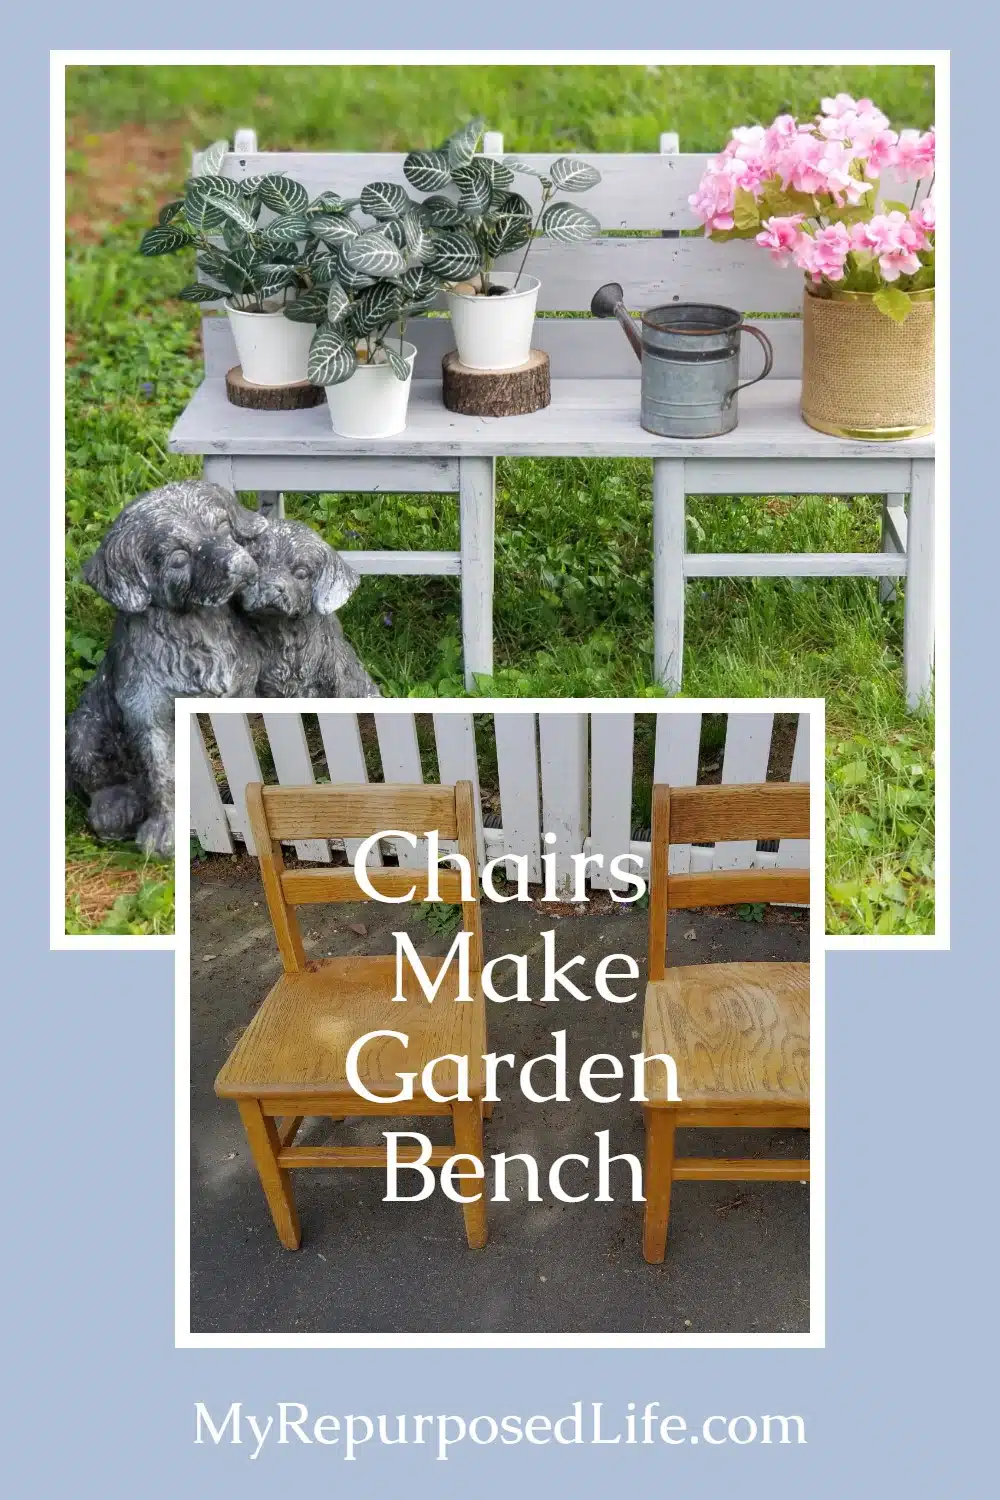 Do you ever have one of those projects you just want to put aside and forget it? This was an easy build, the struggle was the paint. It started out as a kid's bench, but ended up being a bench for the garden. That's when I finally knew what color it should be. #MyRepurposedLife #repurposed #chairs #furniture #garden #bench via @repurposedlife